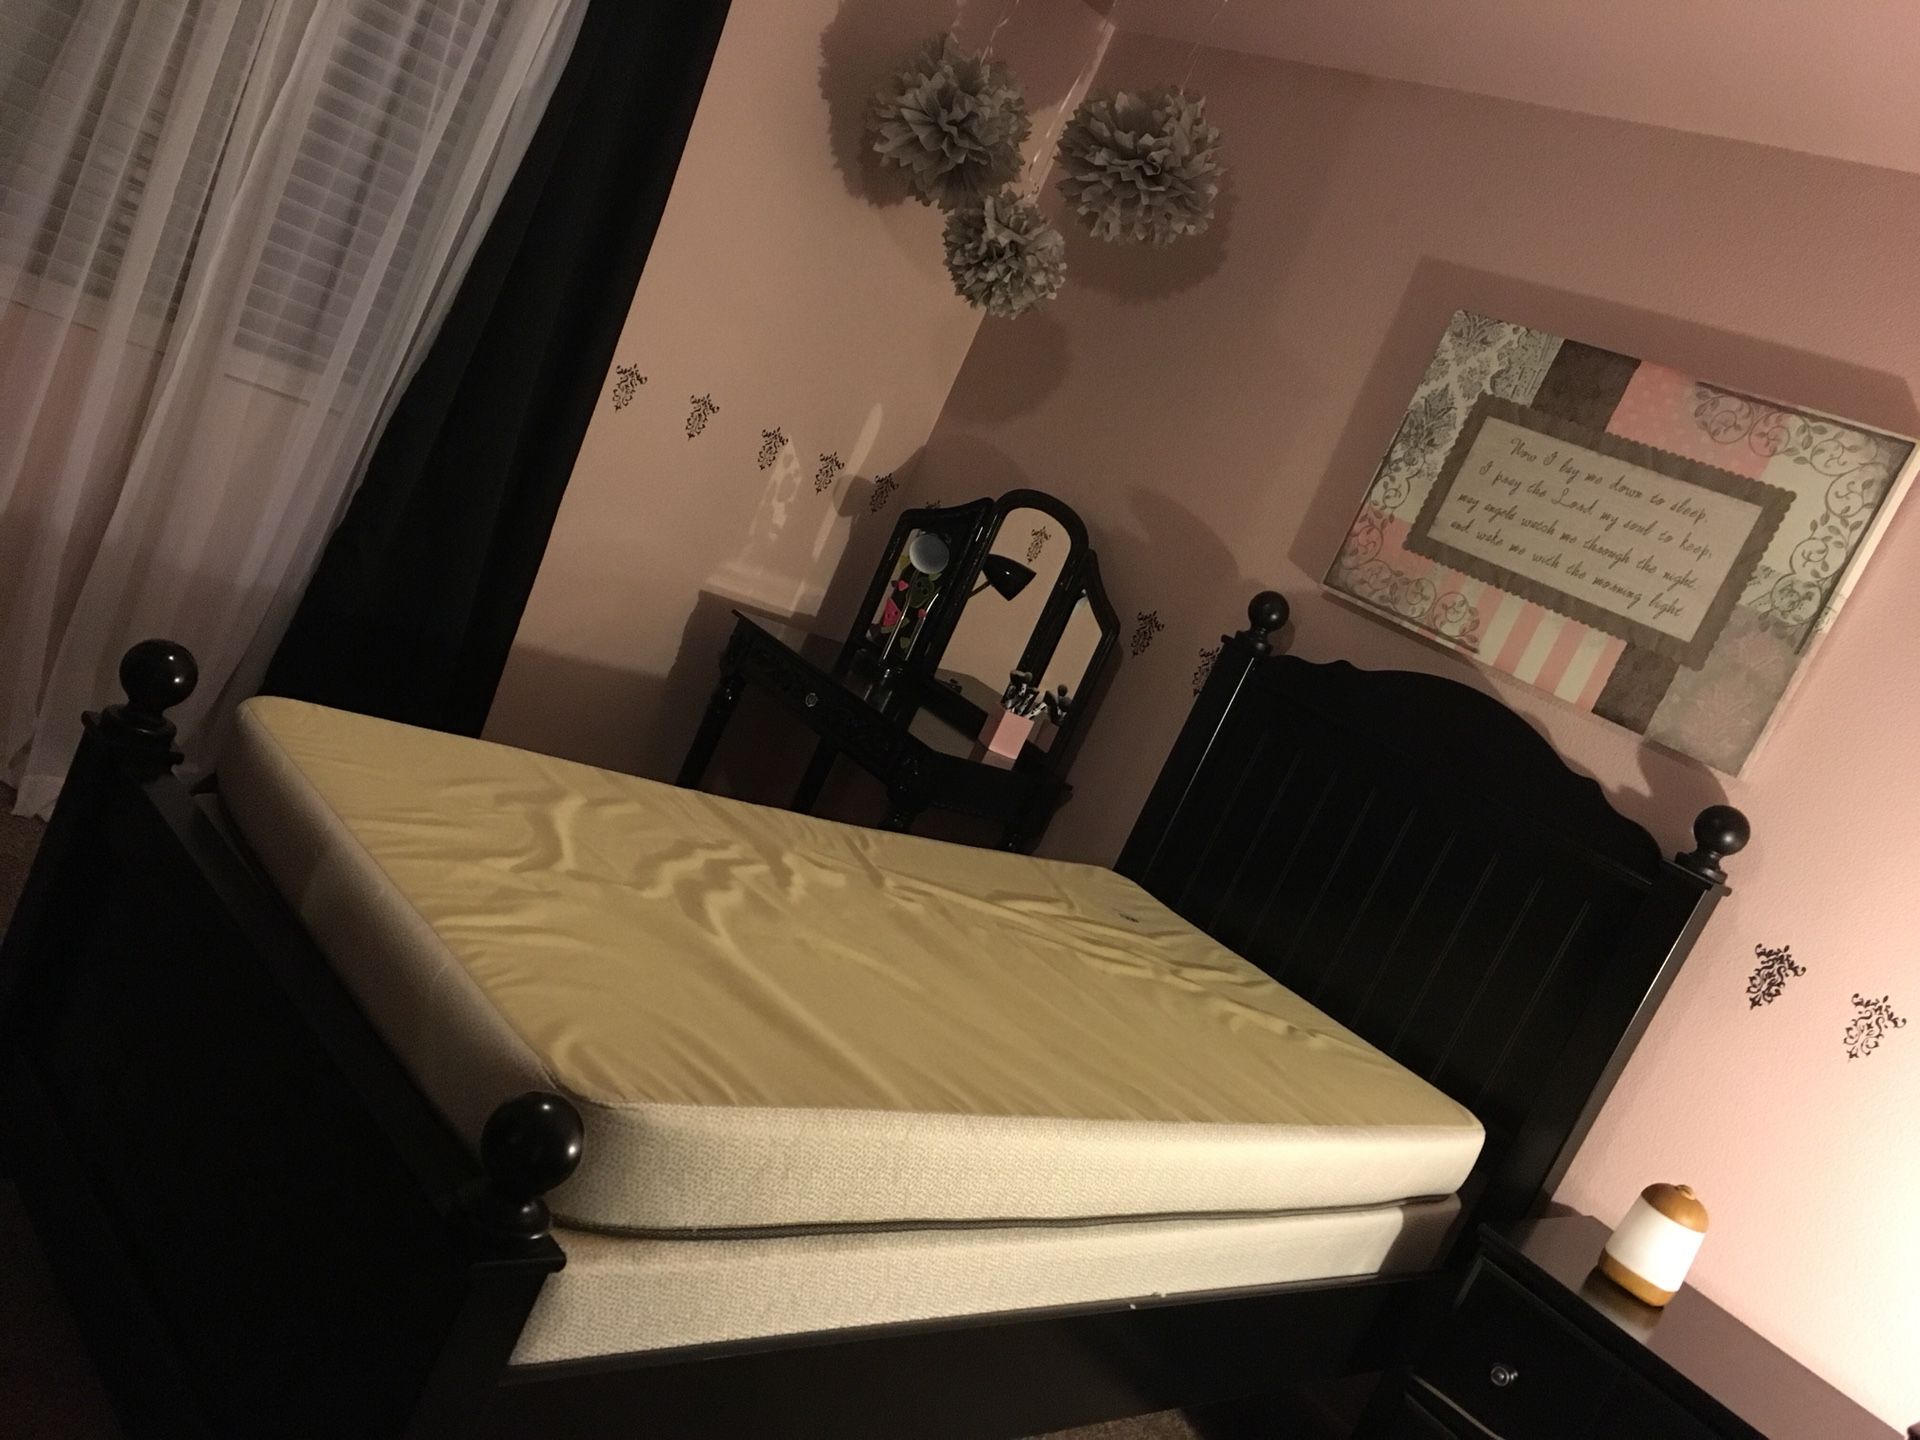 Twin black bed frame